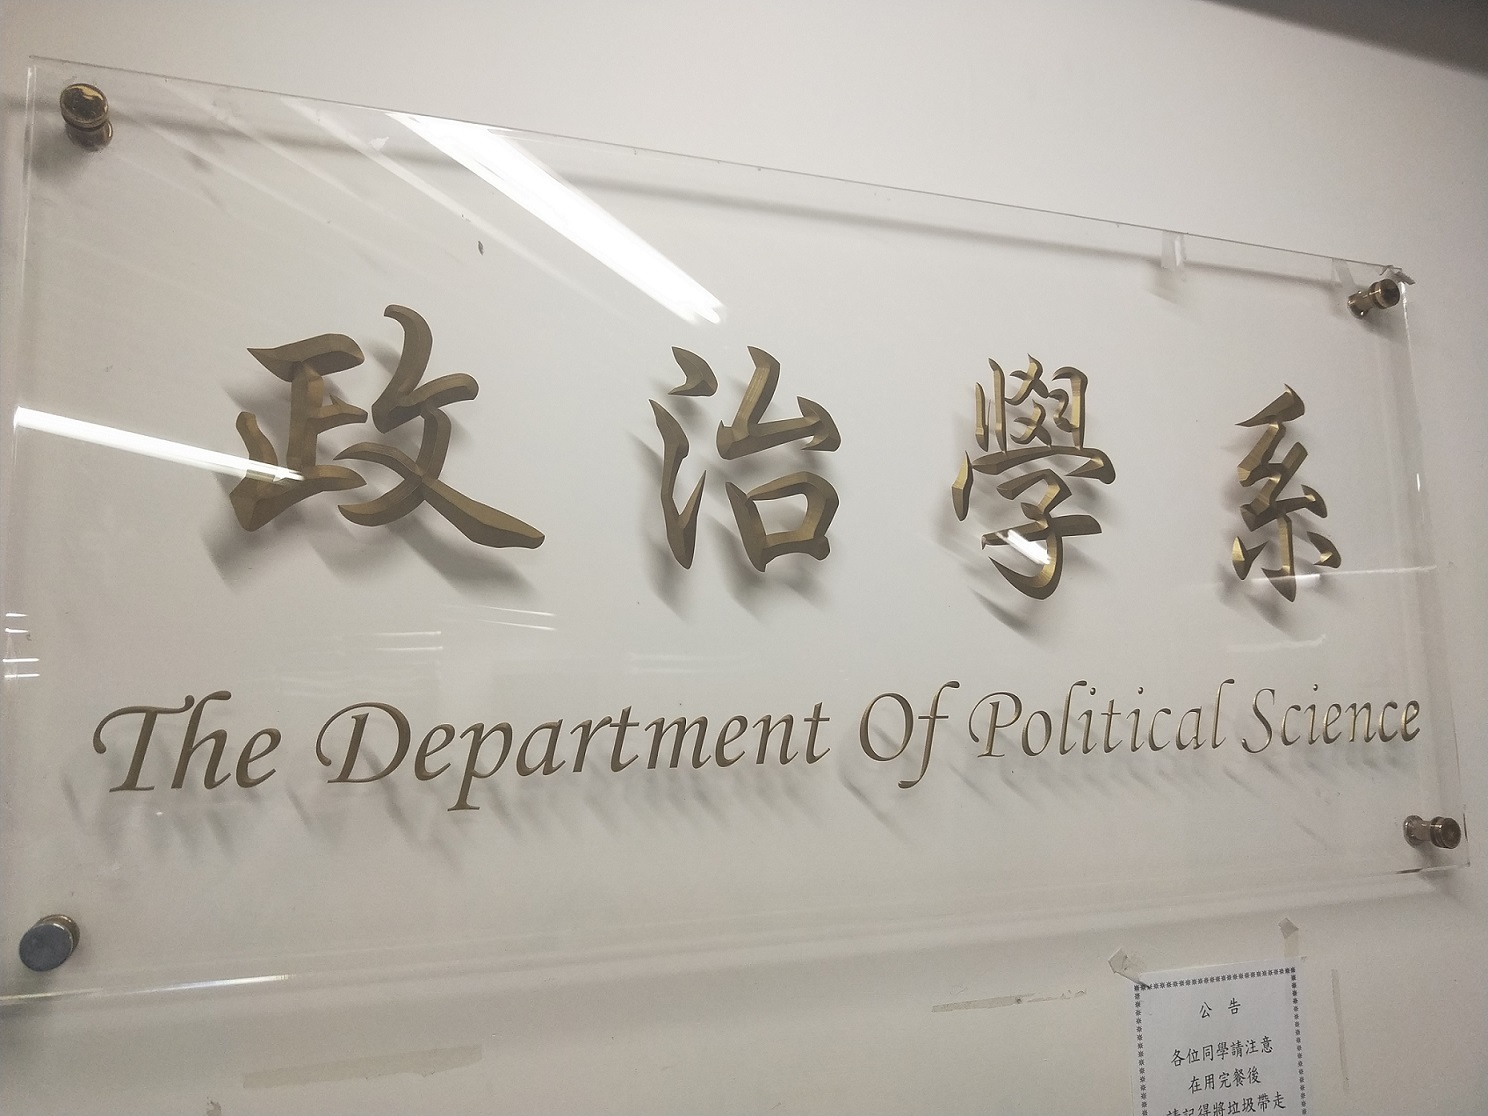 The Department of Political Science